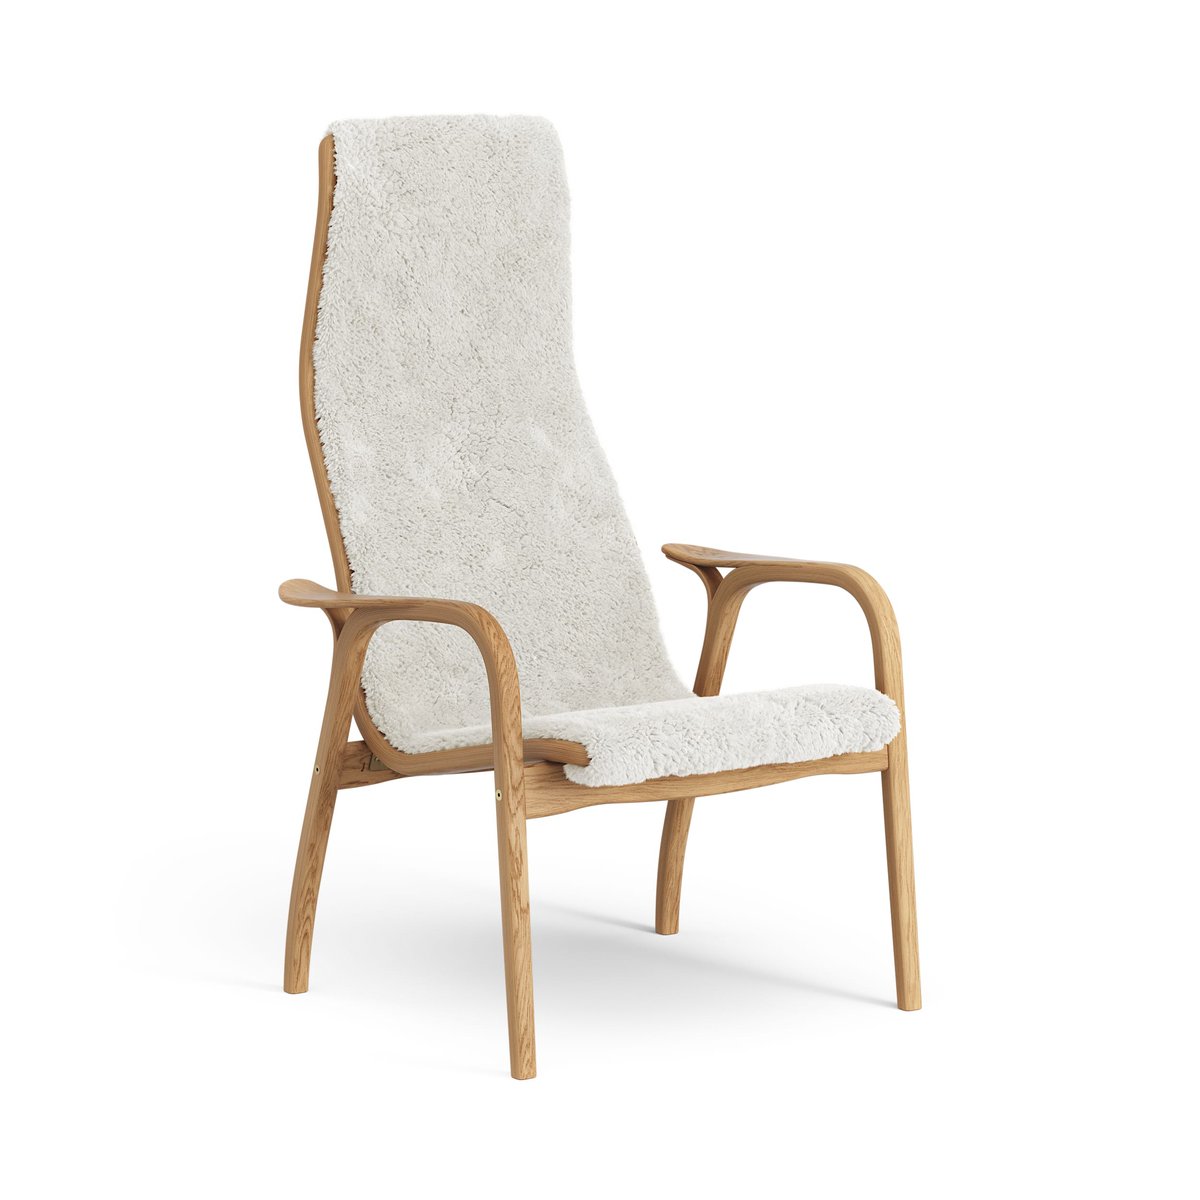 Swedese Lamino Fauteuil Eik geolied/schapenvacht Offwhite (wit)